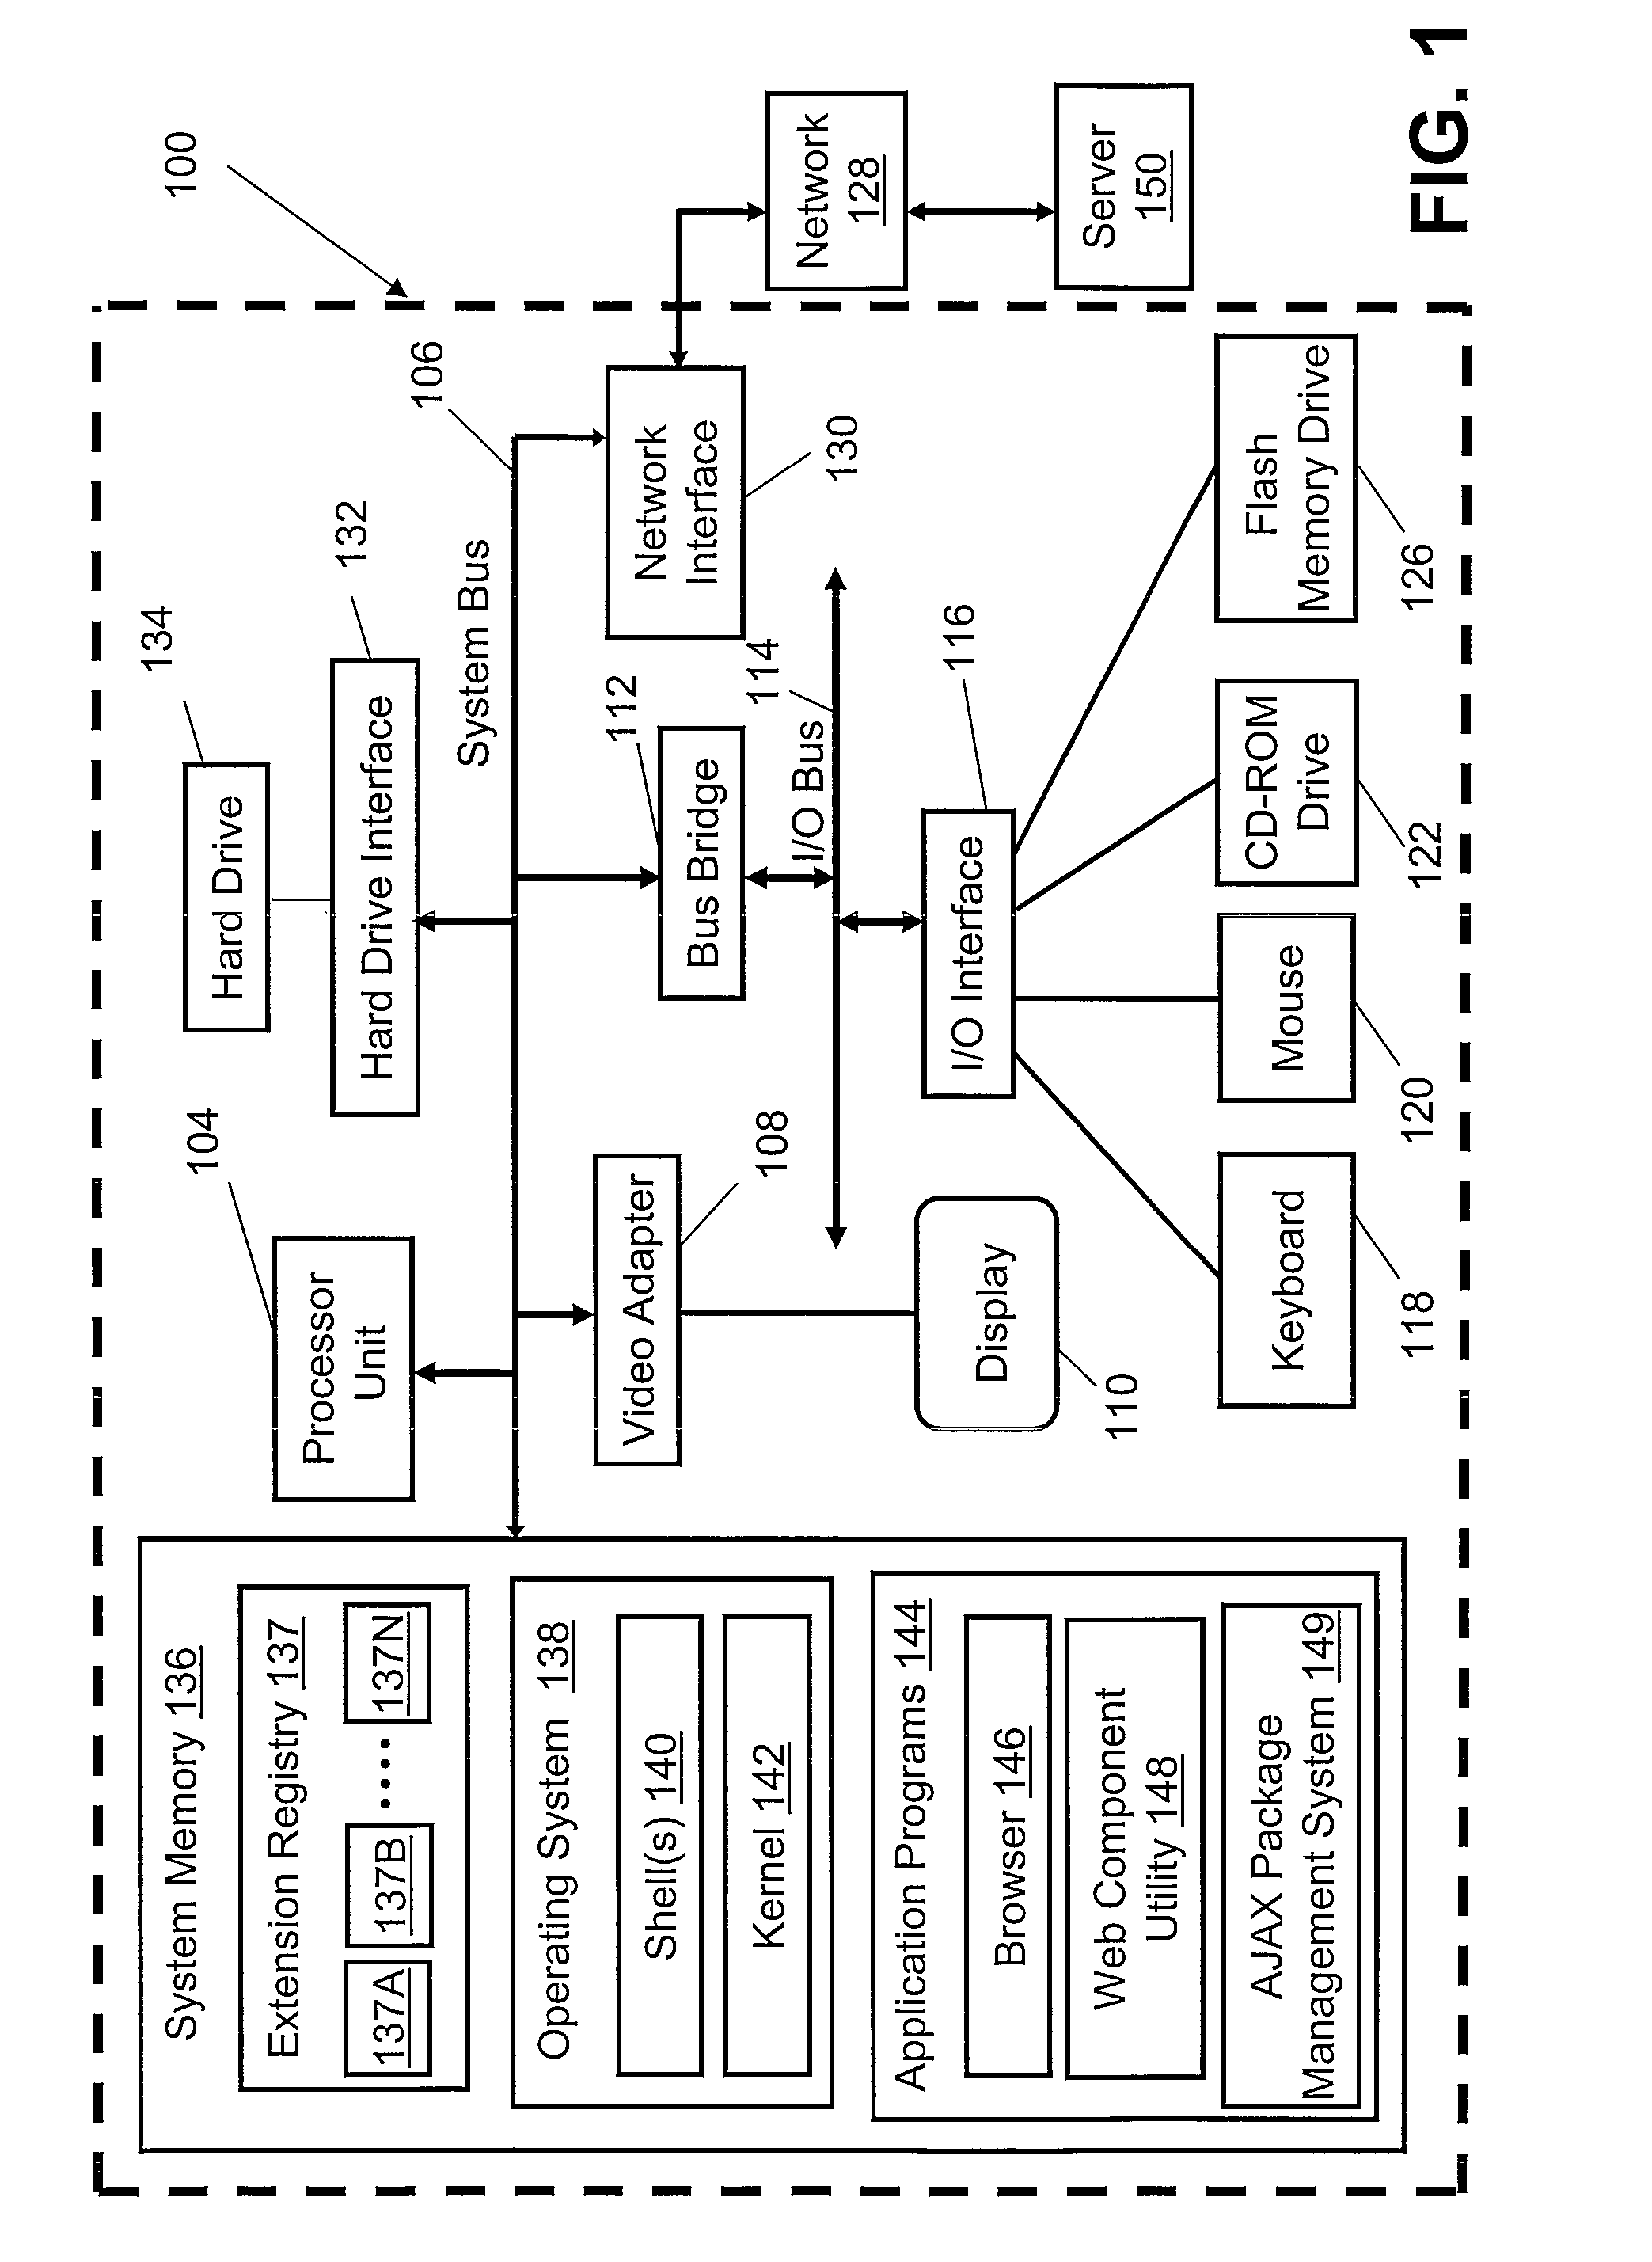 Method and system for building compound extensible ajax applications